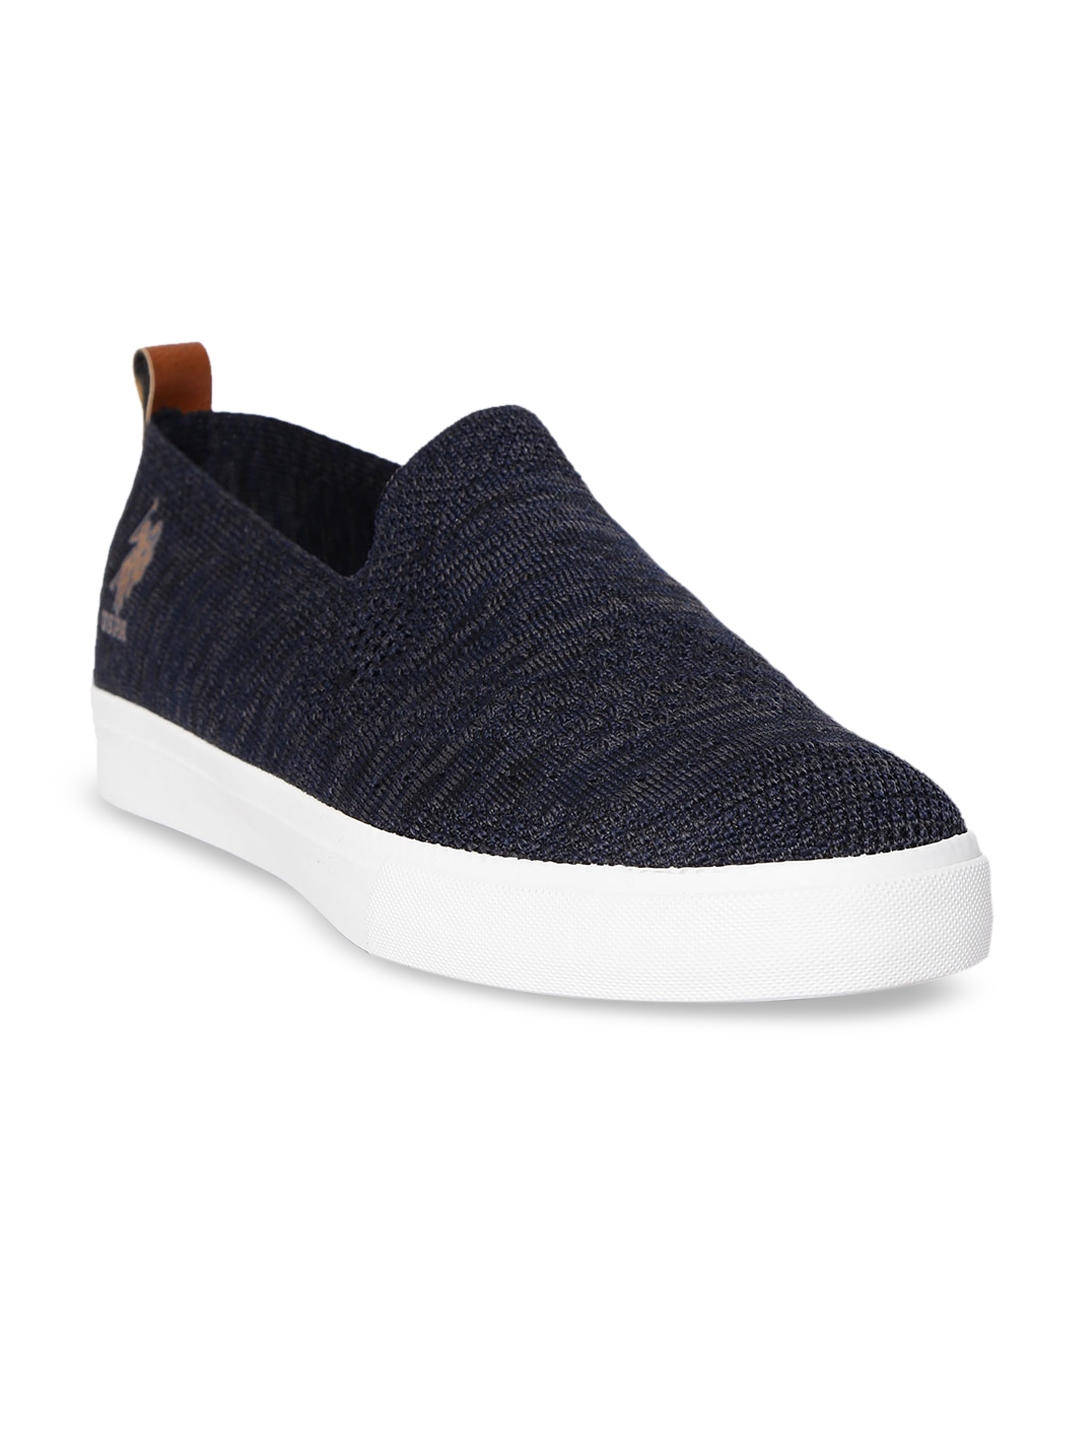 Buy U.S. Polo Assn. Men Navy Blue Slip On Sneakers - Casual Shoes for ...